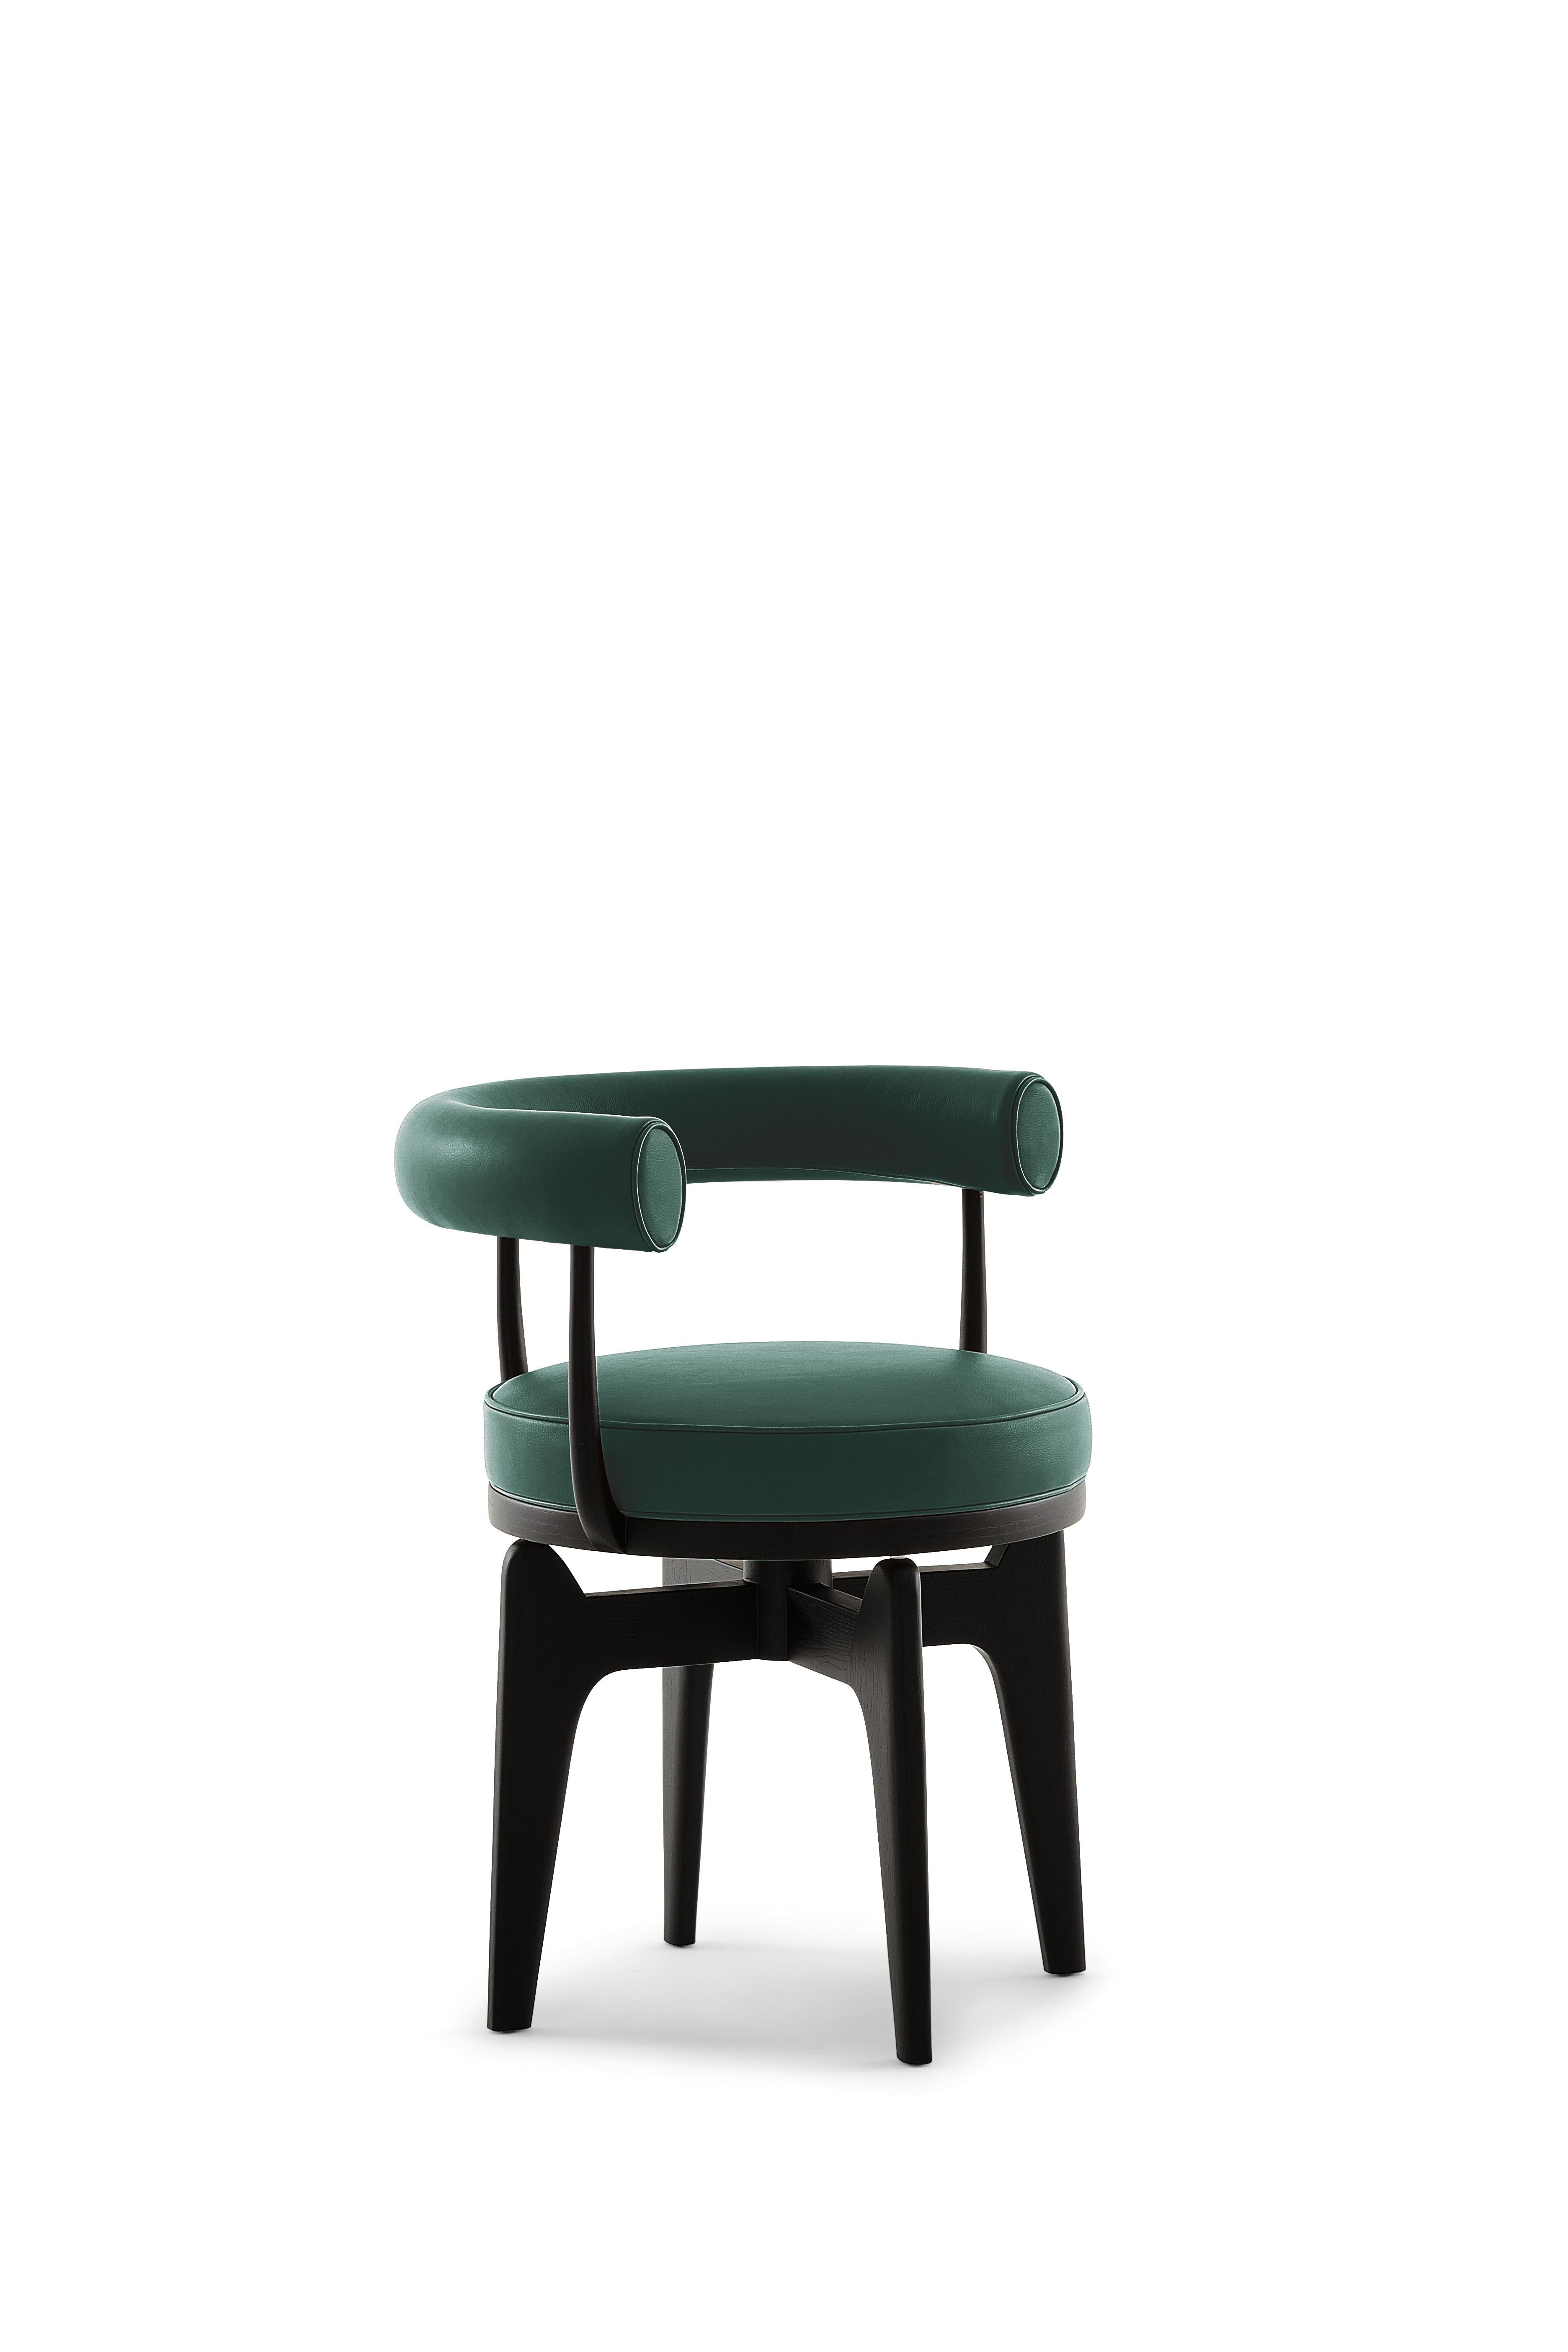 Charlotte Perriand Indochine Armchair
Manufactured by Cassina in Italy

This swivel armchair is a re-working of the LC7, whose frame was in tubular metal, and was the work of Charlotte Perriand in 1927. It was later exhibited along with other